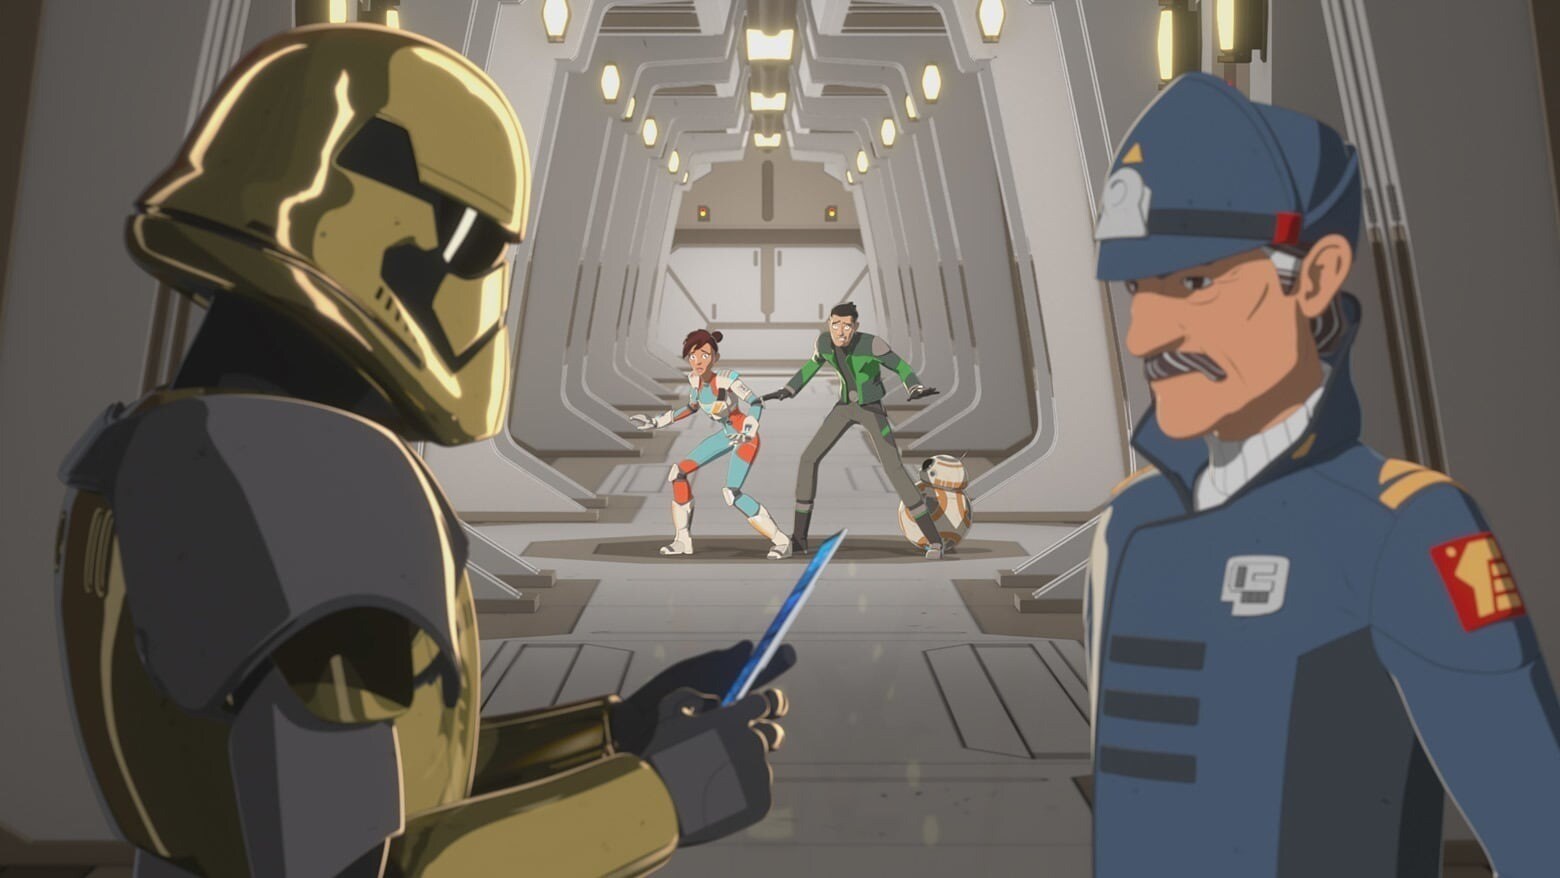 Captain Doza meets with the First Order, as Torra, Kaz, and BB-8 walk by in the background